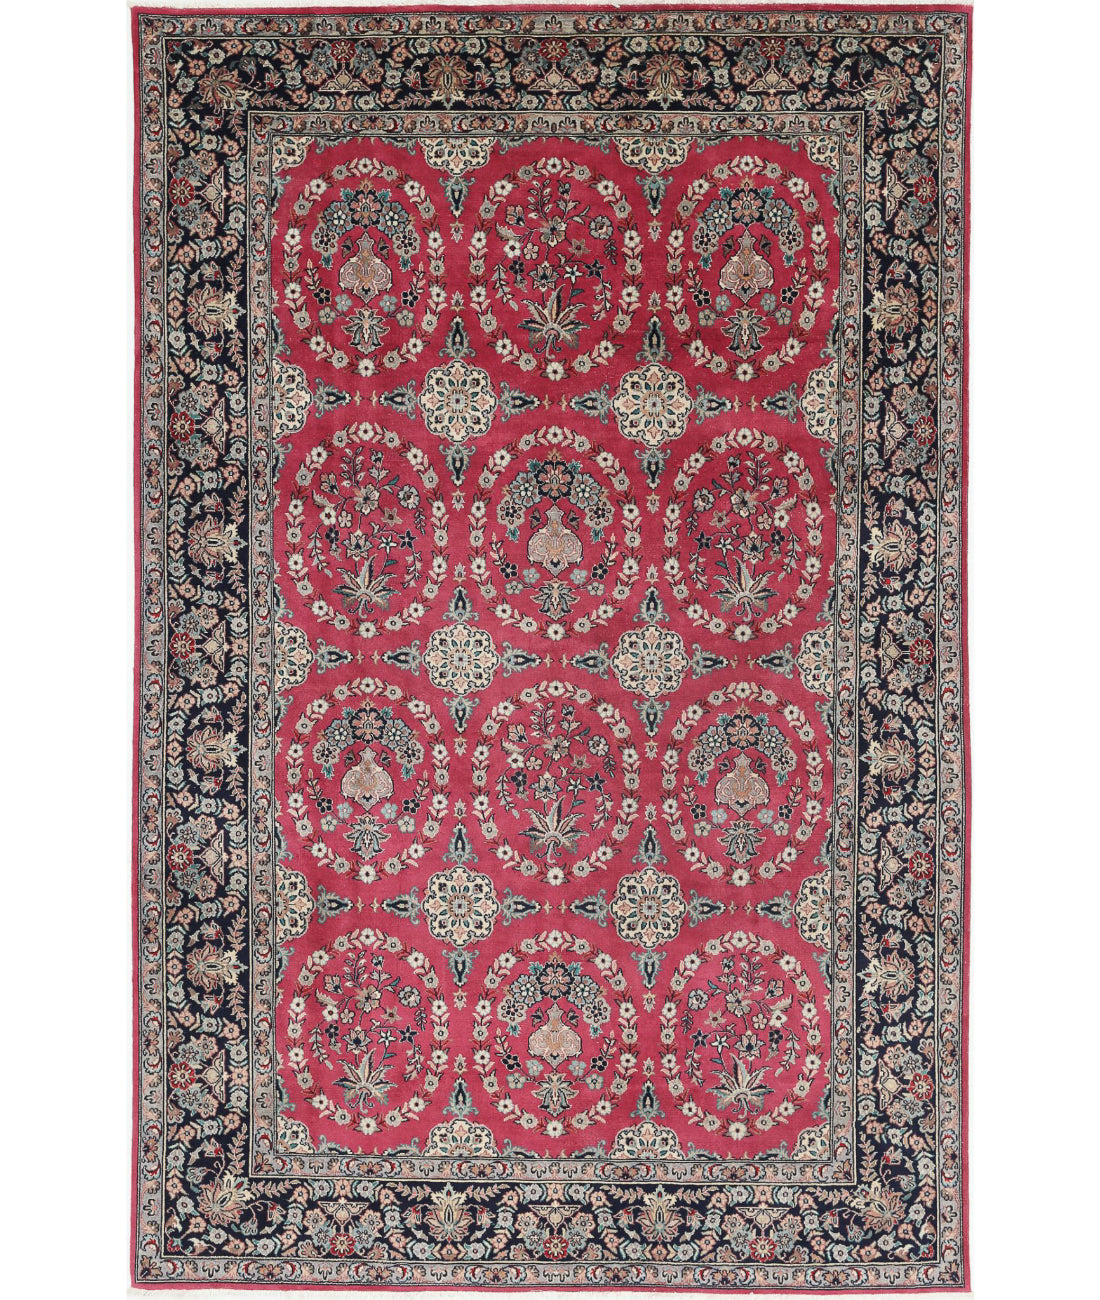 Hand Knotted Heritage Persian Style Wool Rug - 5'10'' x 9'3'' 5'10'' x 9'3'' (175 X 278) / Red / Black